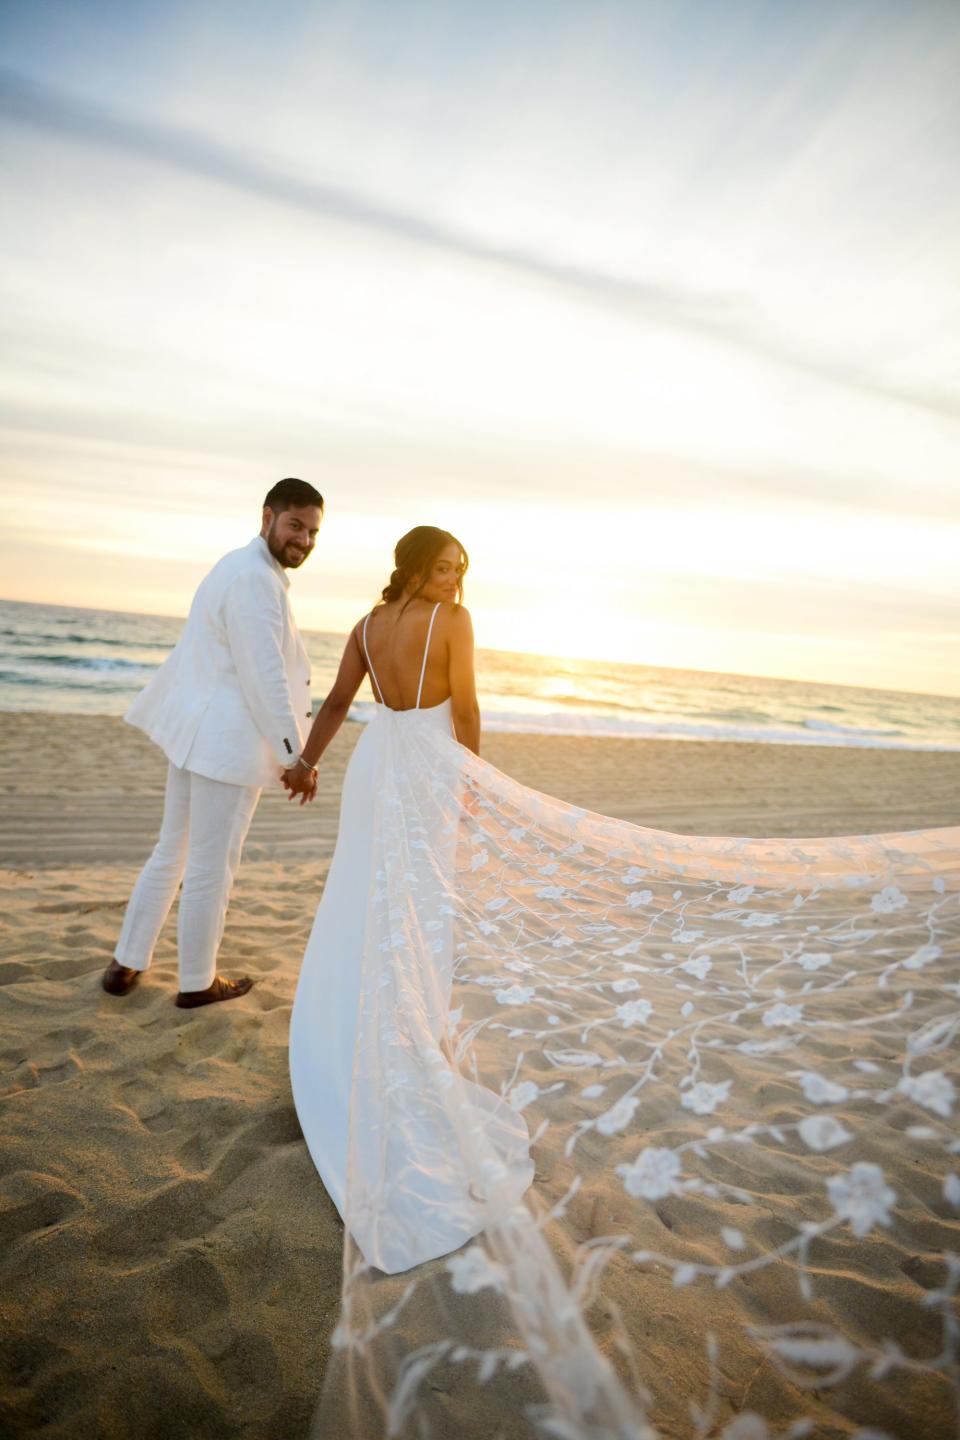 A man and woman look over their shoulders in their wedding attire on a beach.